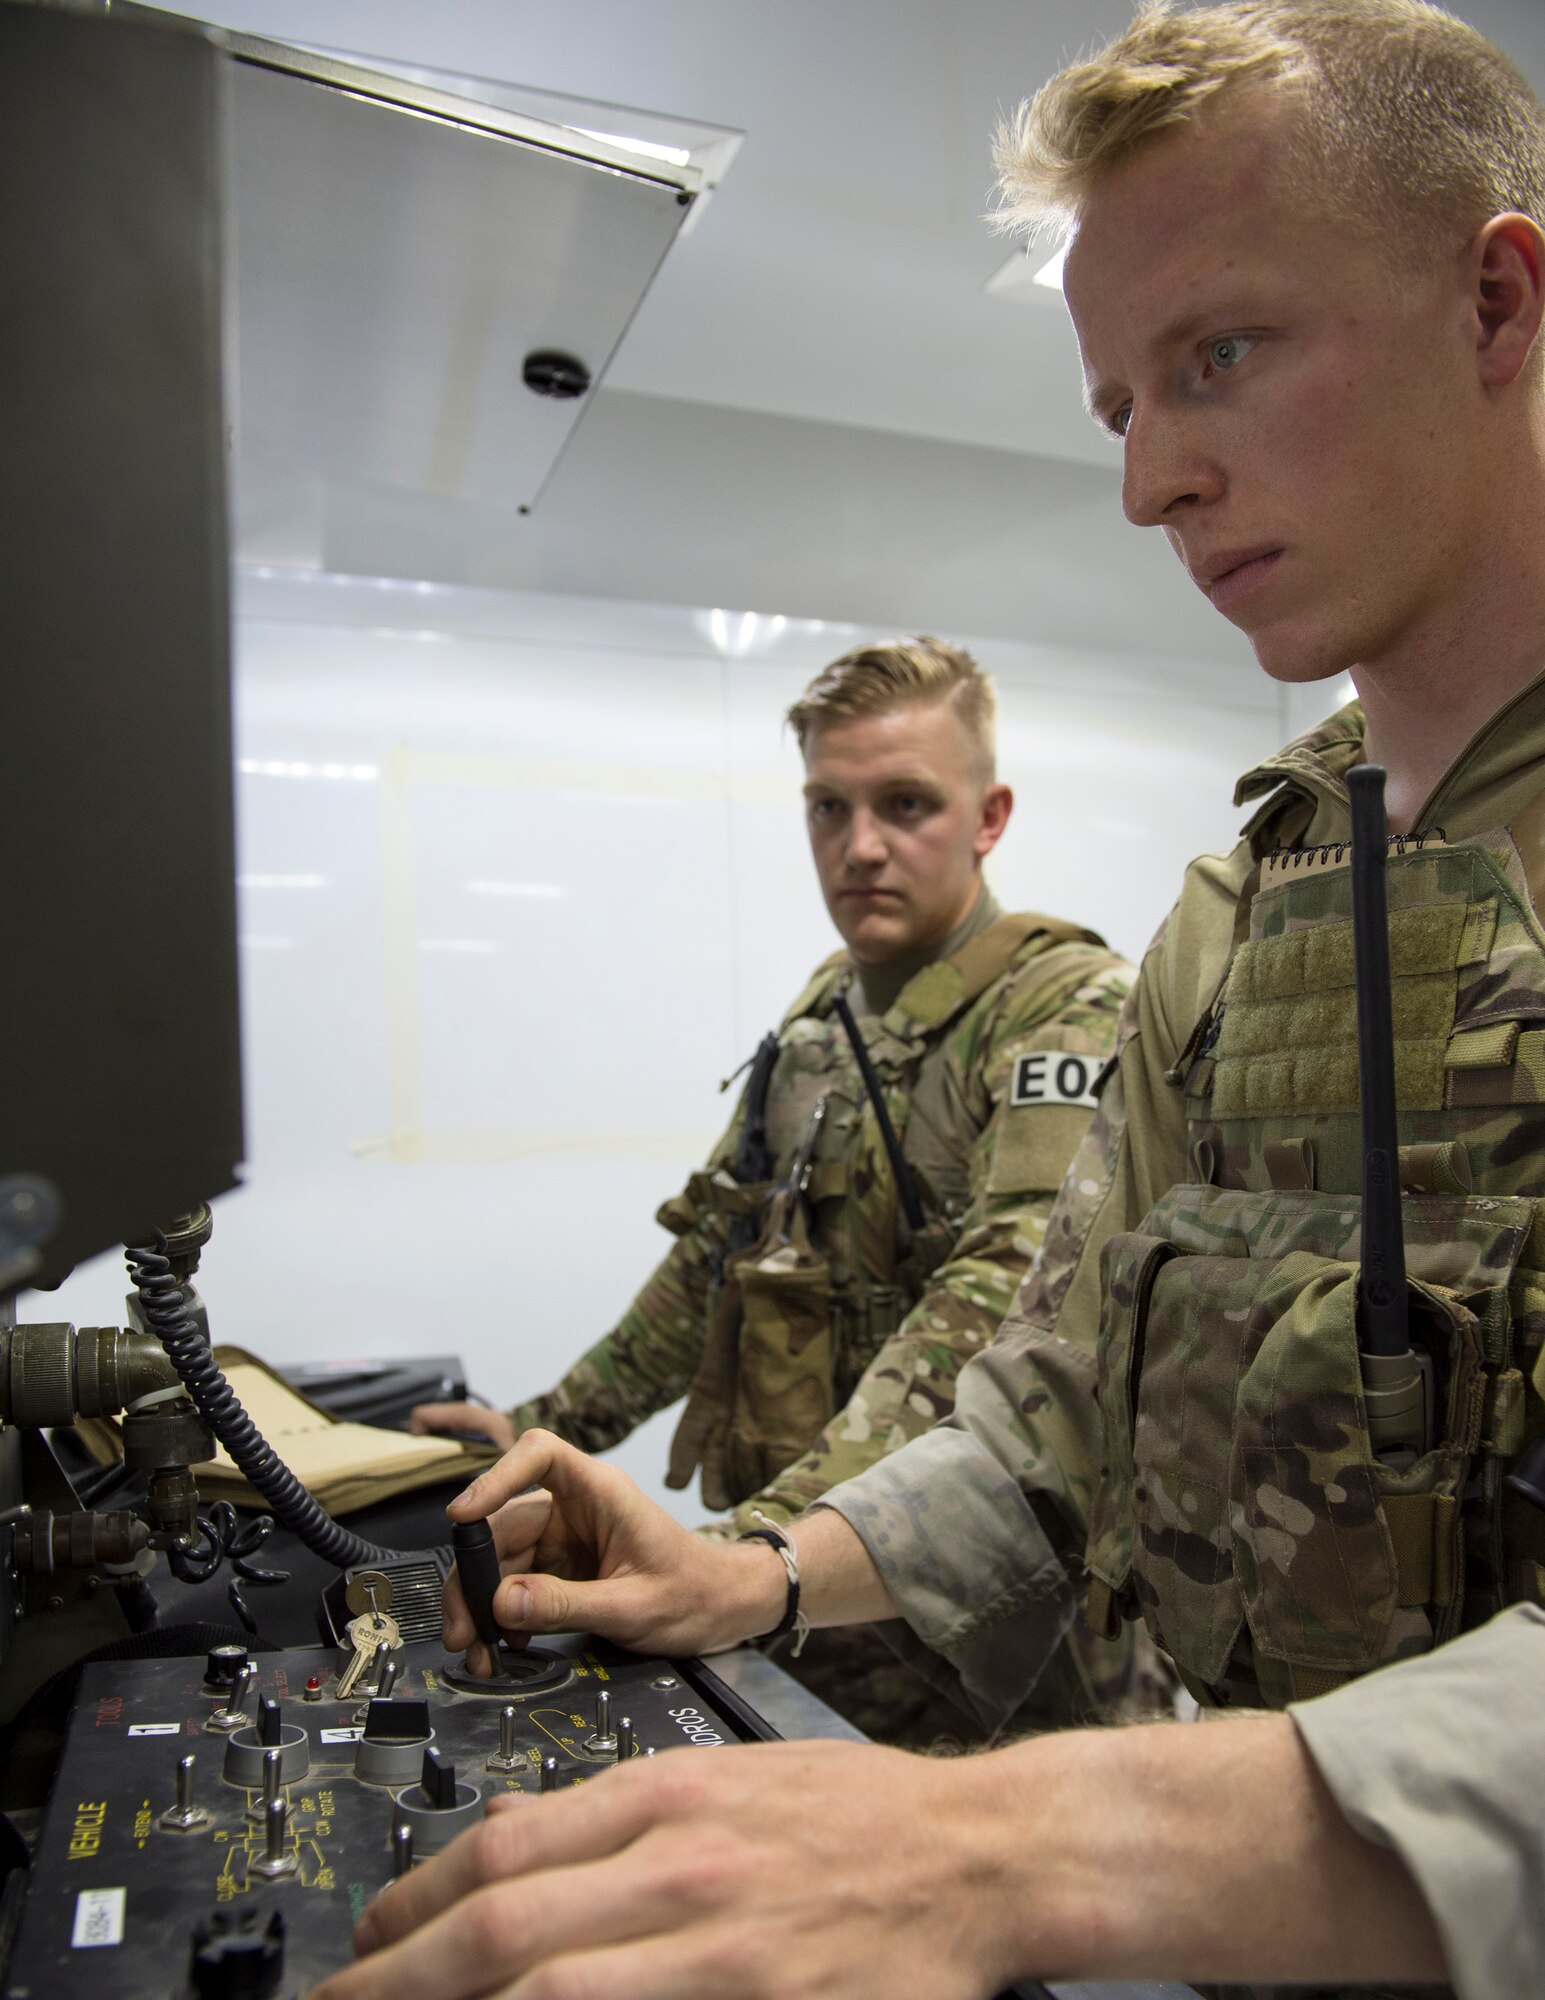 U.S. Air Force Senior Airman Luke Bryant, right, a team member and robot operator with the 379th Expeditionary Civil Engineer Squadron Explosive Ordnance Disposal Flight, controls a Remotec ANDROS F6A heavy-duty robot during a vehicle search exercise at Al Udeid Air Base, Qatar, Aug. 26, 2017.